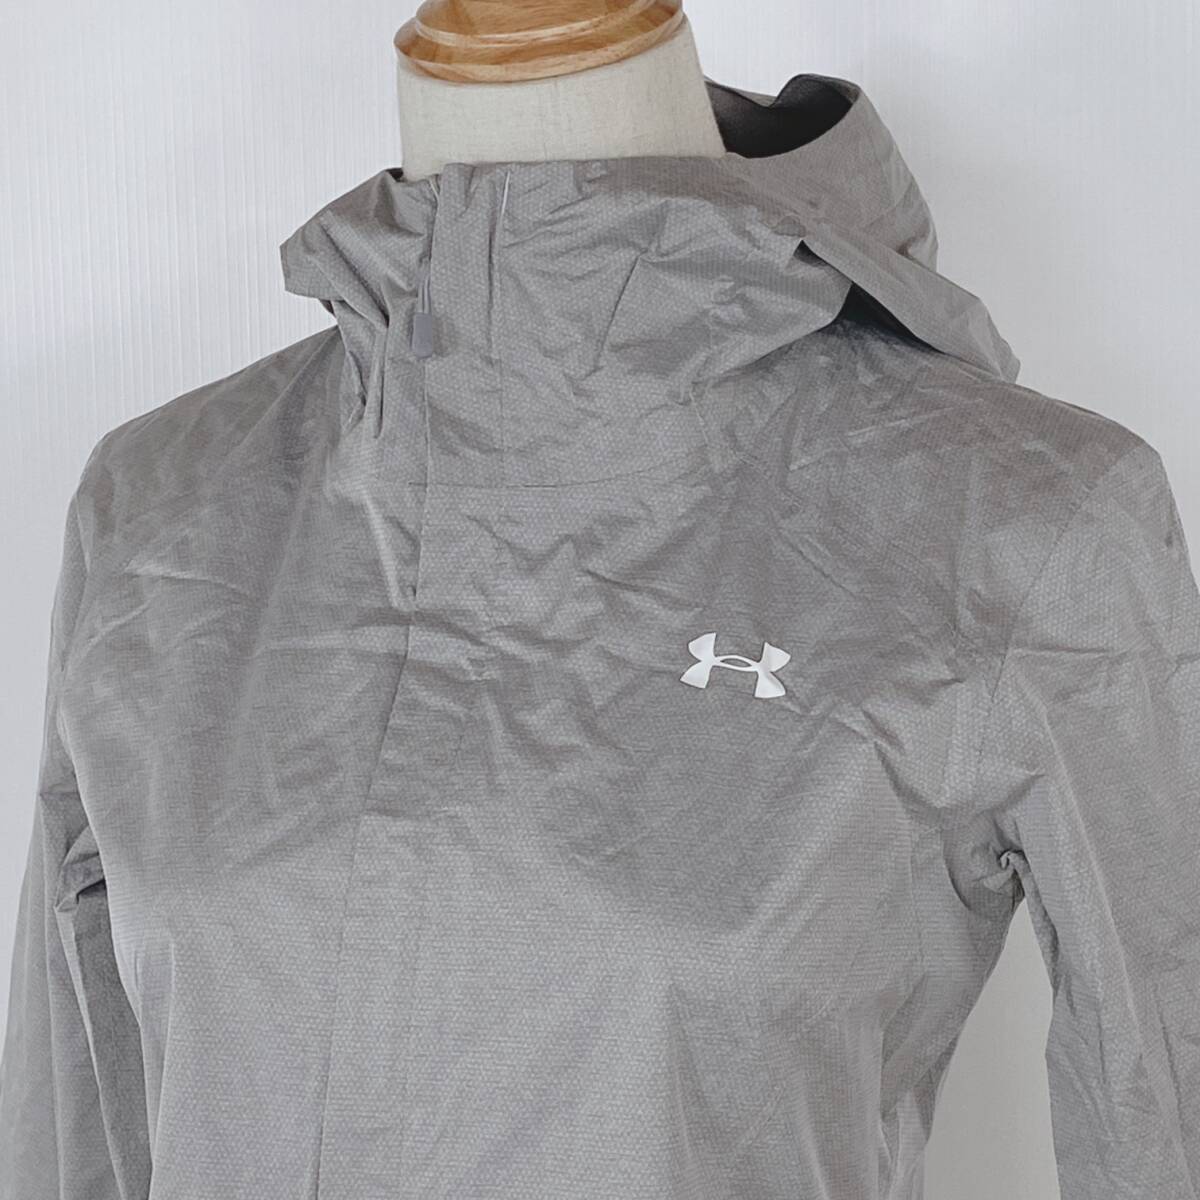 Z1352 Under Armor lady's nylon jacket running wear sport wear 80 size sporty all-purpose simple USED old clothes 